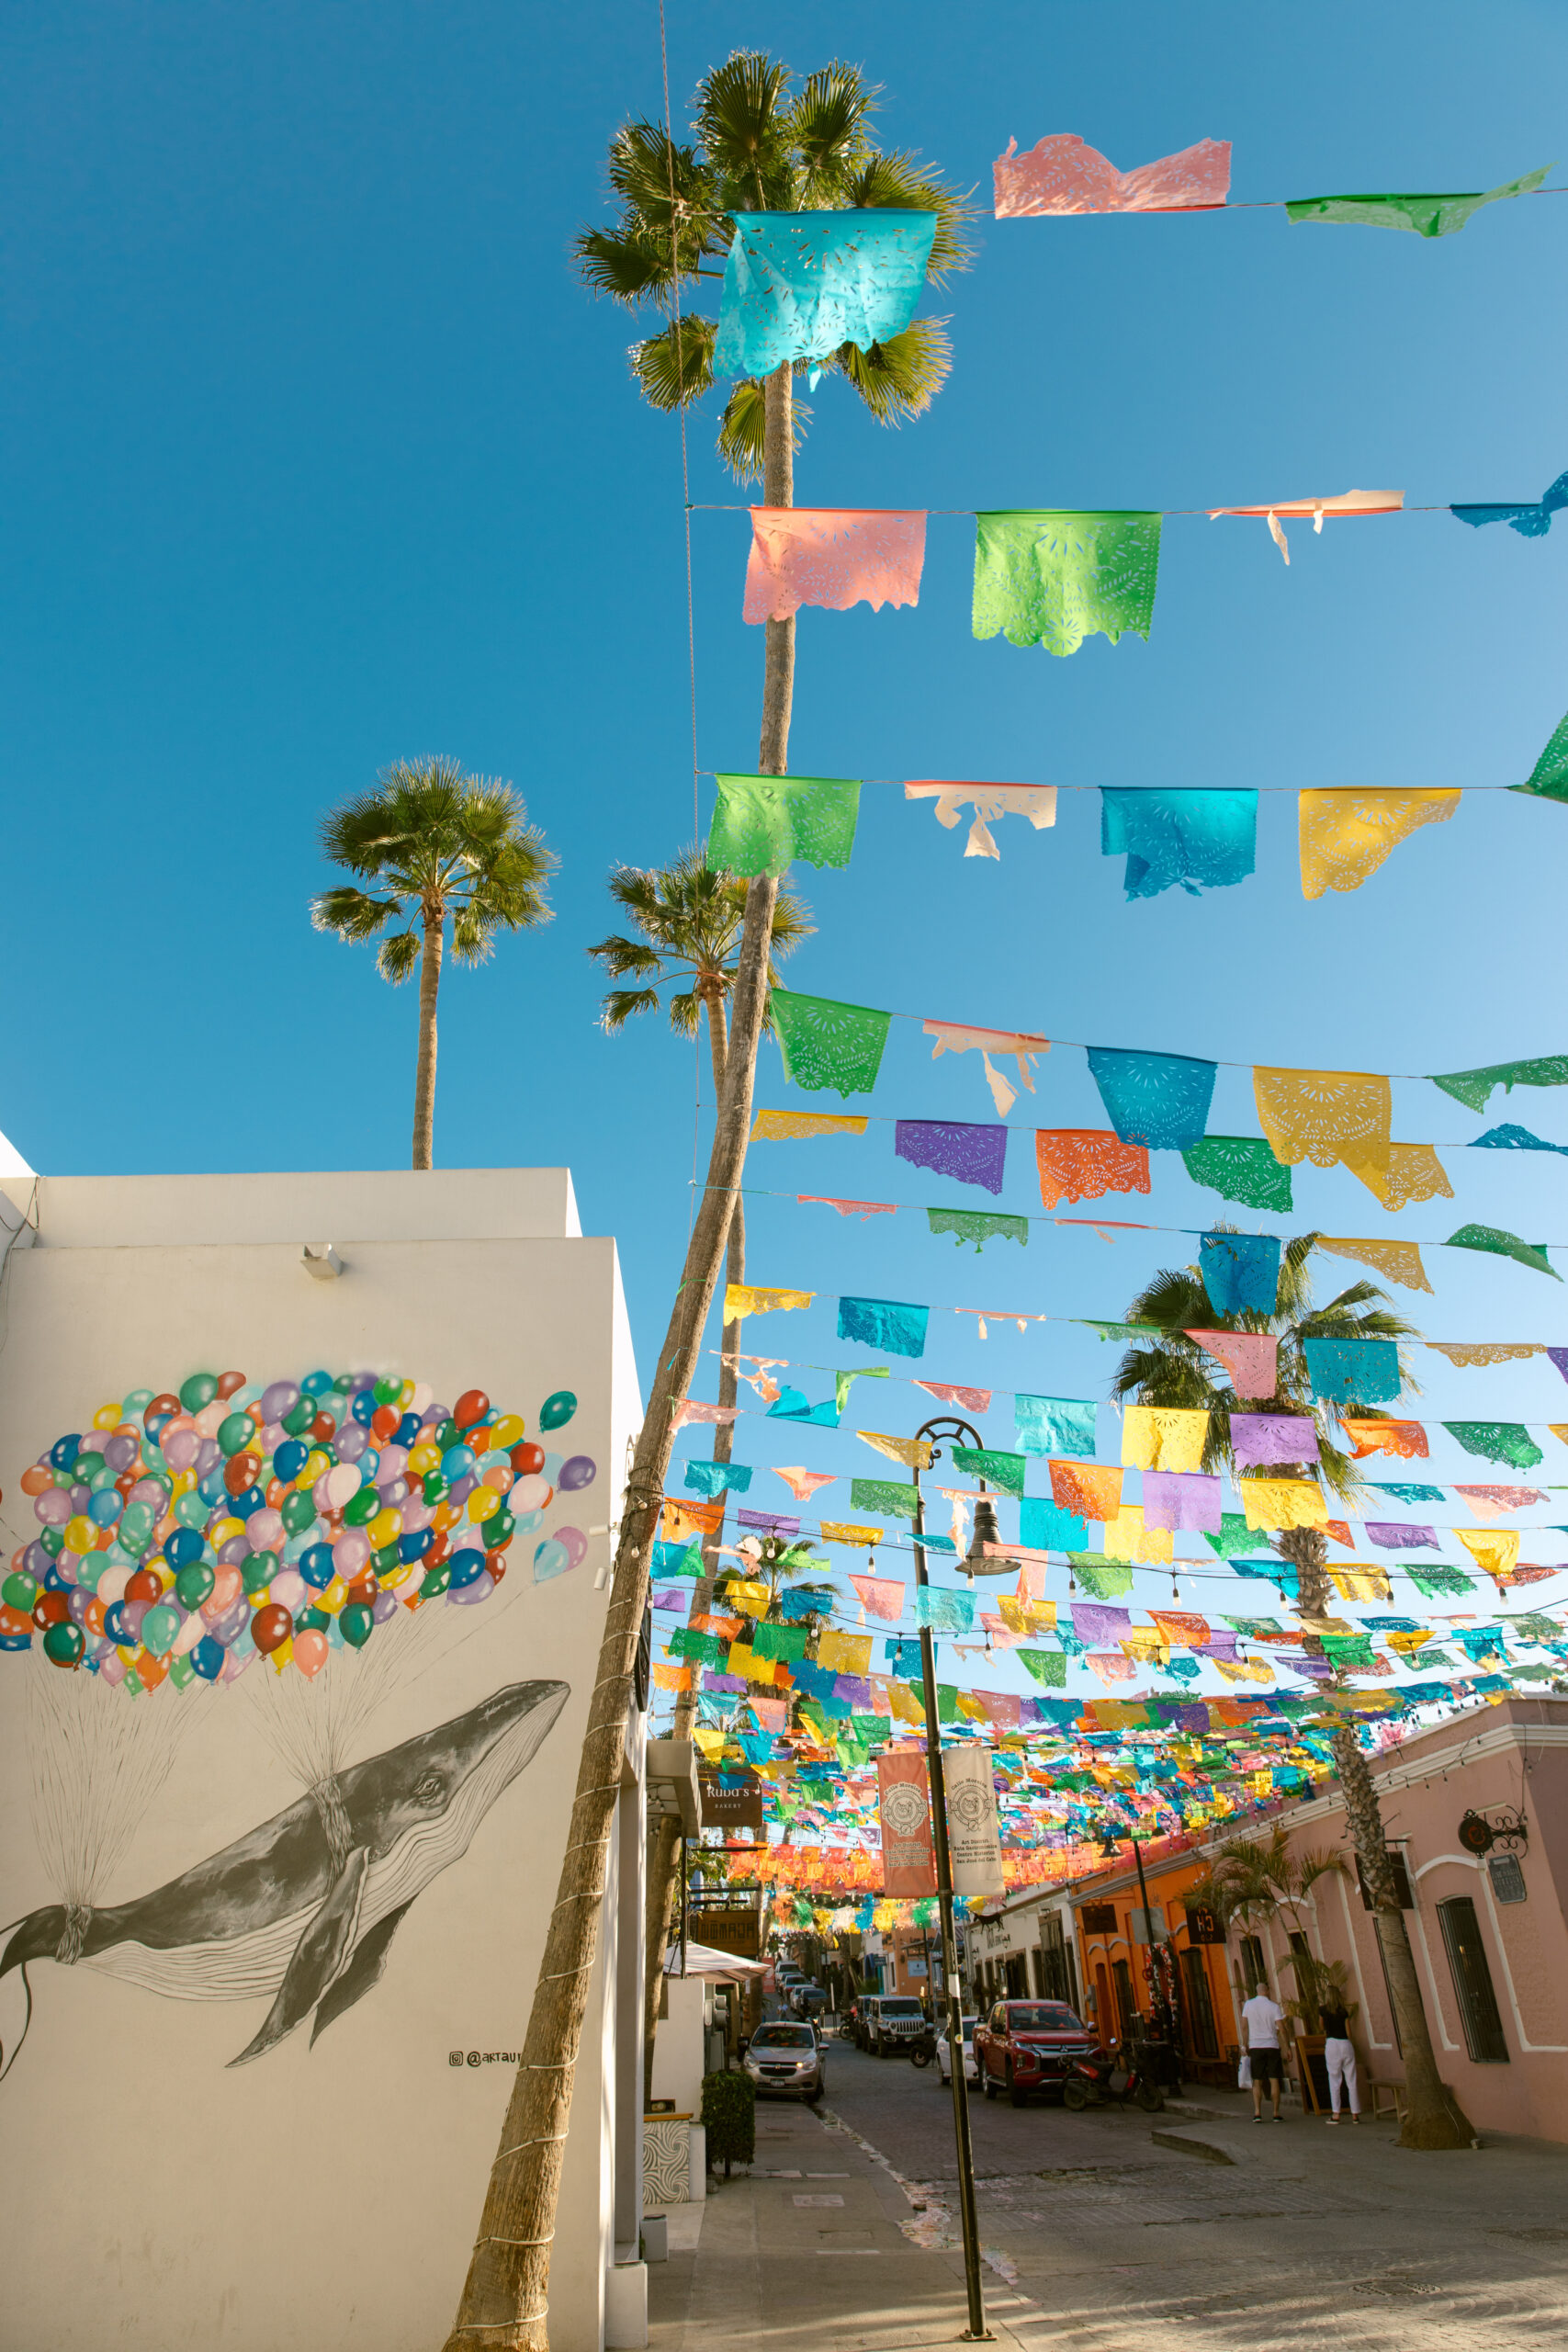 San Jose Del Cabo, Mexico street art. Whale with balloons street mural downtown San Jose Del Cabo. Papel picado banner. Colorful paper banner in Mexico above downtown street. blue skies and palm trees. 